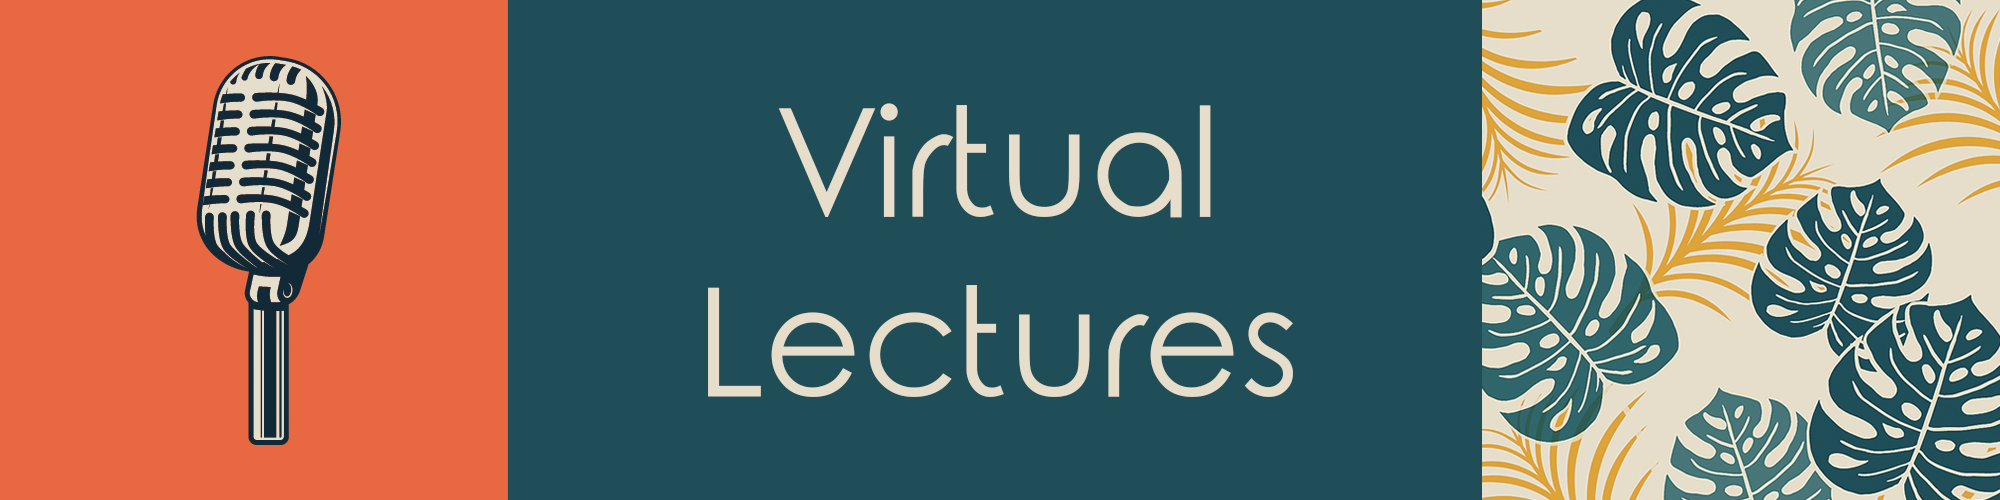 Virtual Lectures